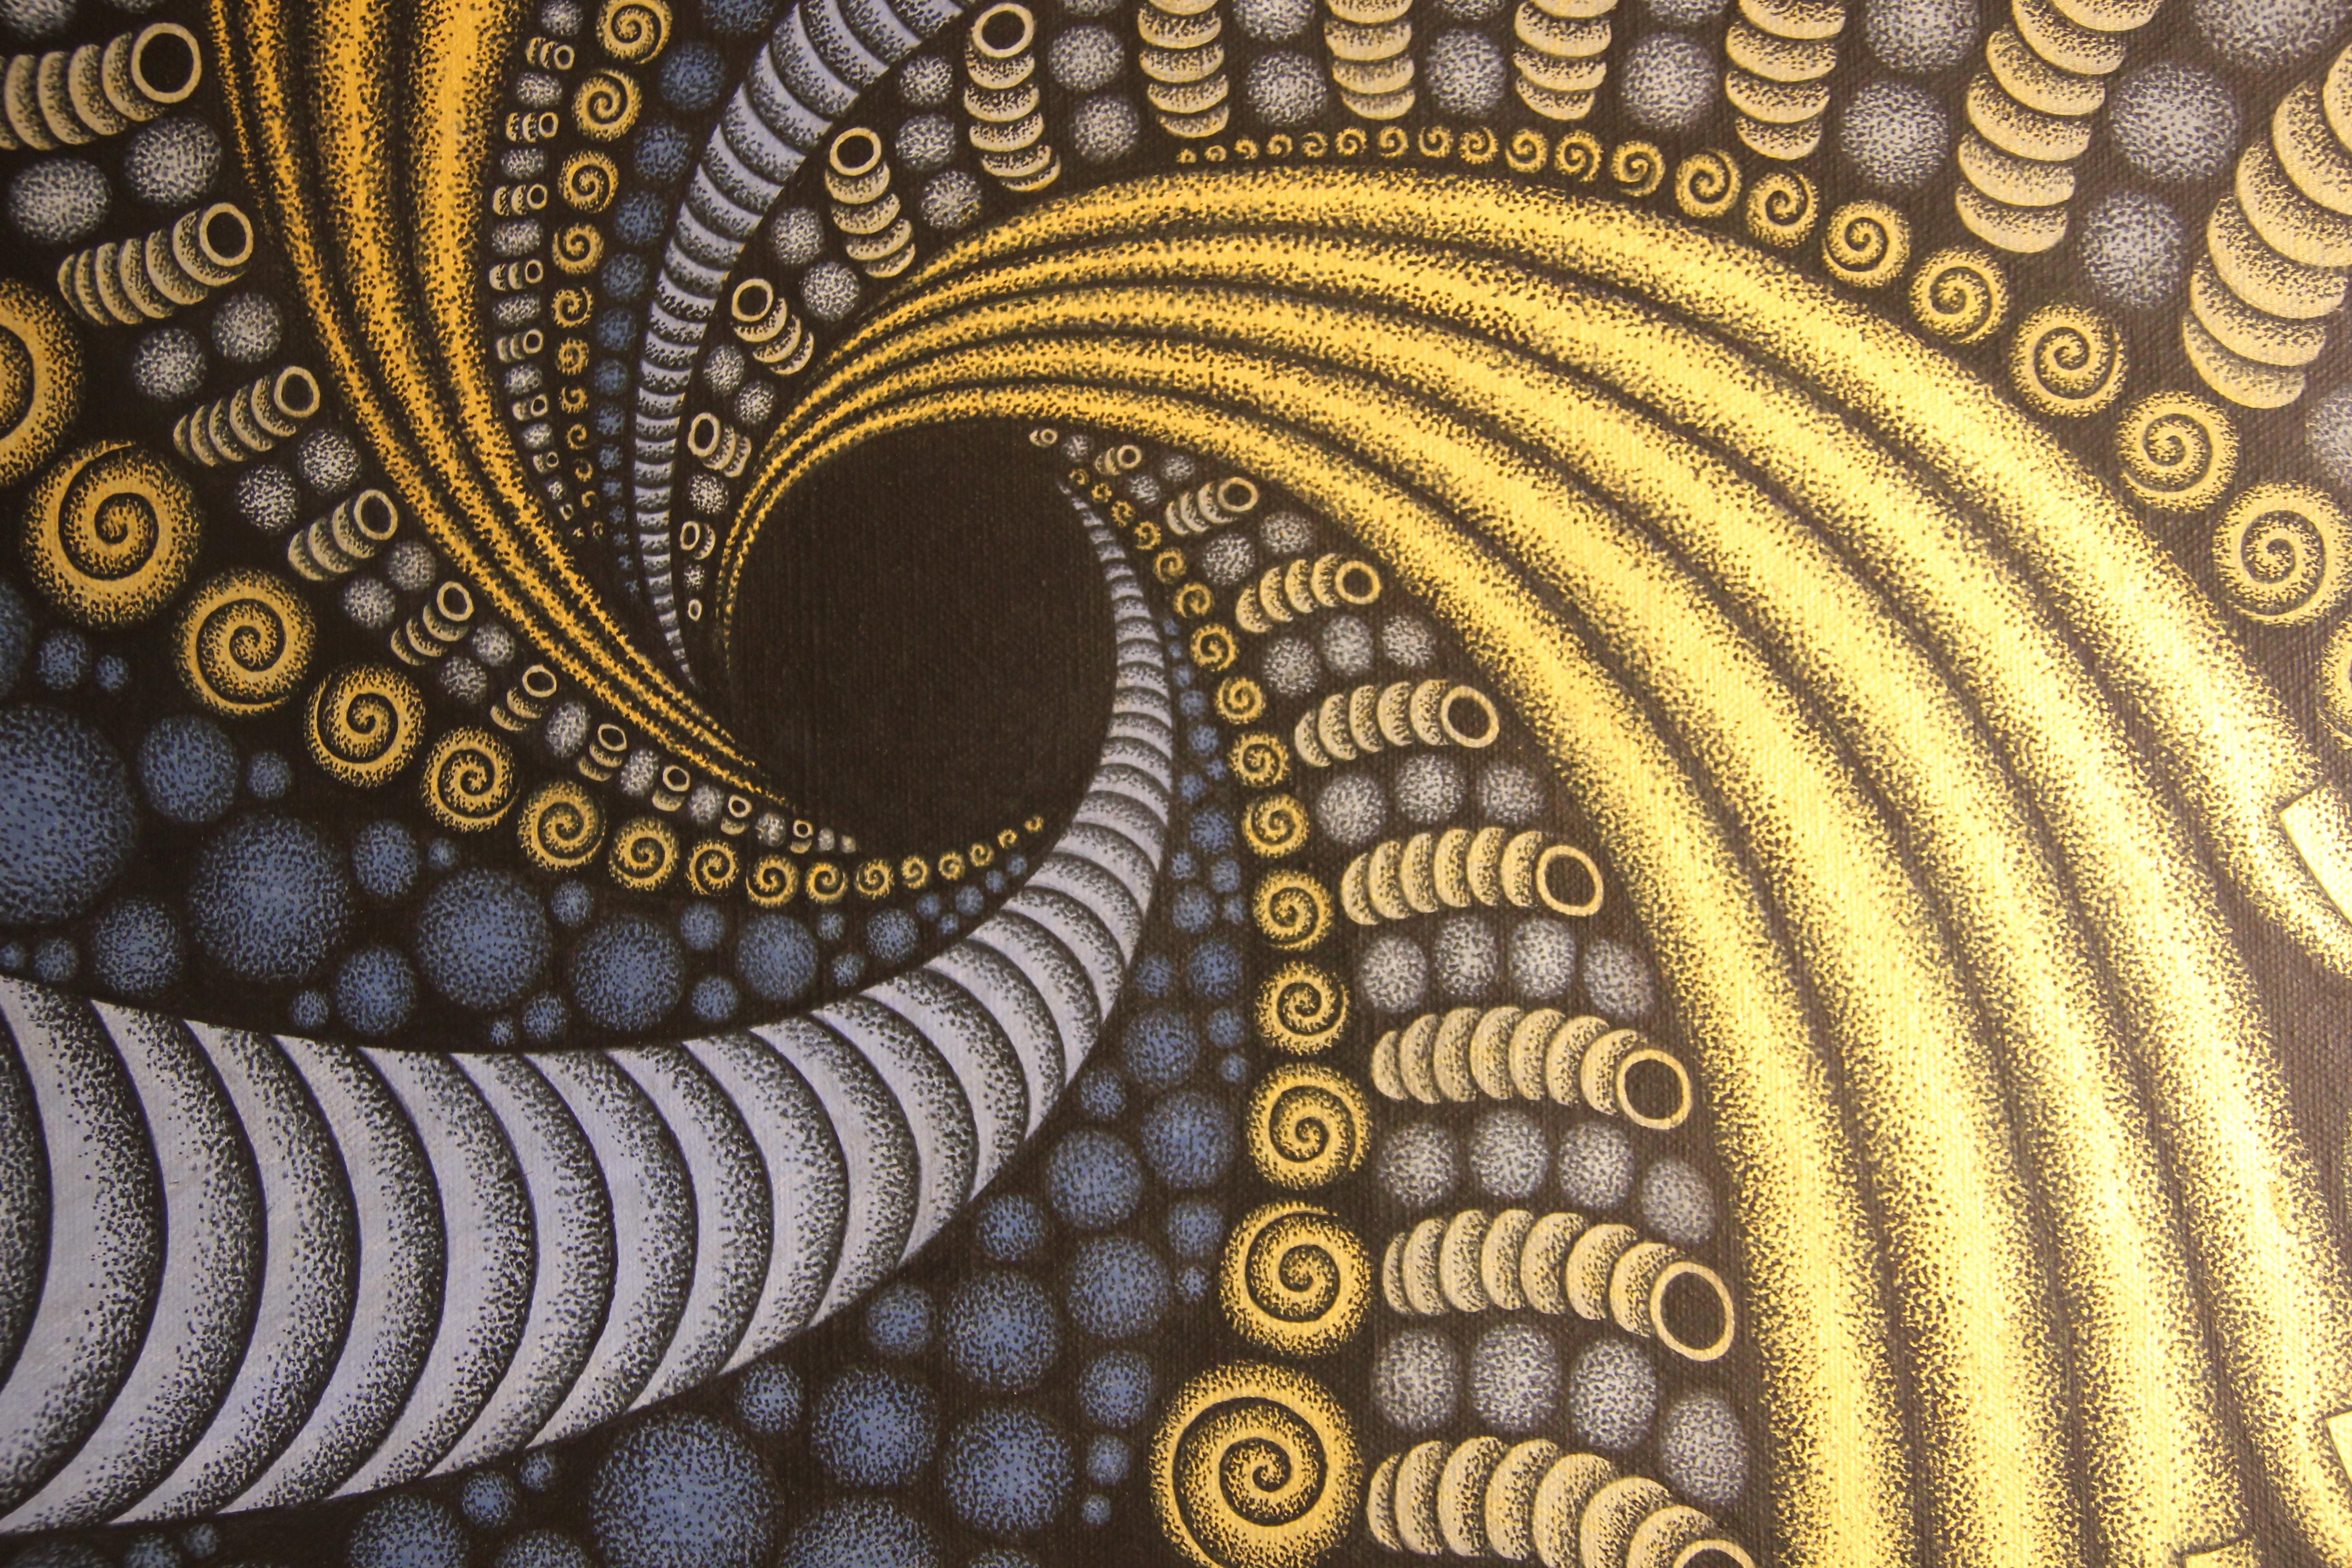 Abstract Geometric Op Art Painting by Thai artist Paramat Leung-On. Rich gold, yellow, and blue circular shapes swirl against a black background forming abstract figures of hands and mouths. The geometric pattern form an optical illusion that draws